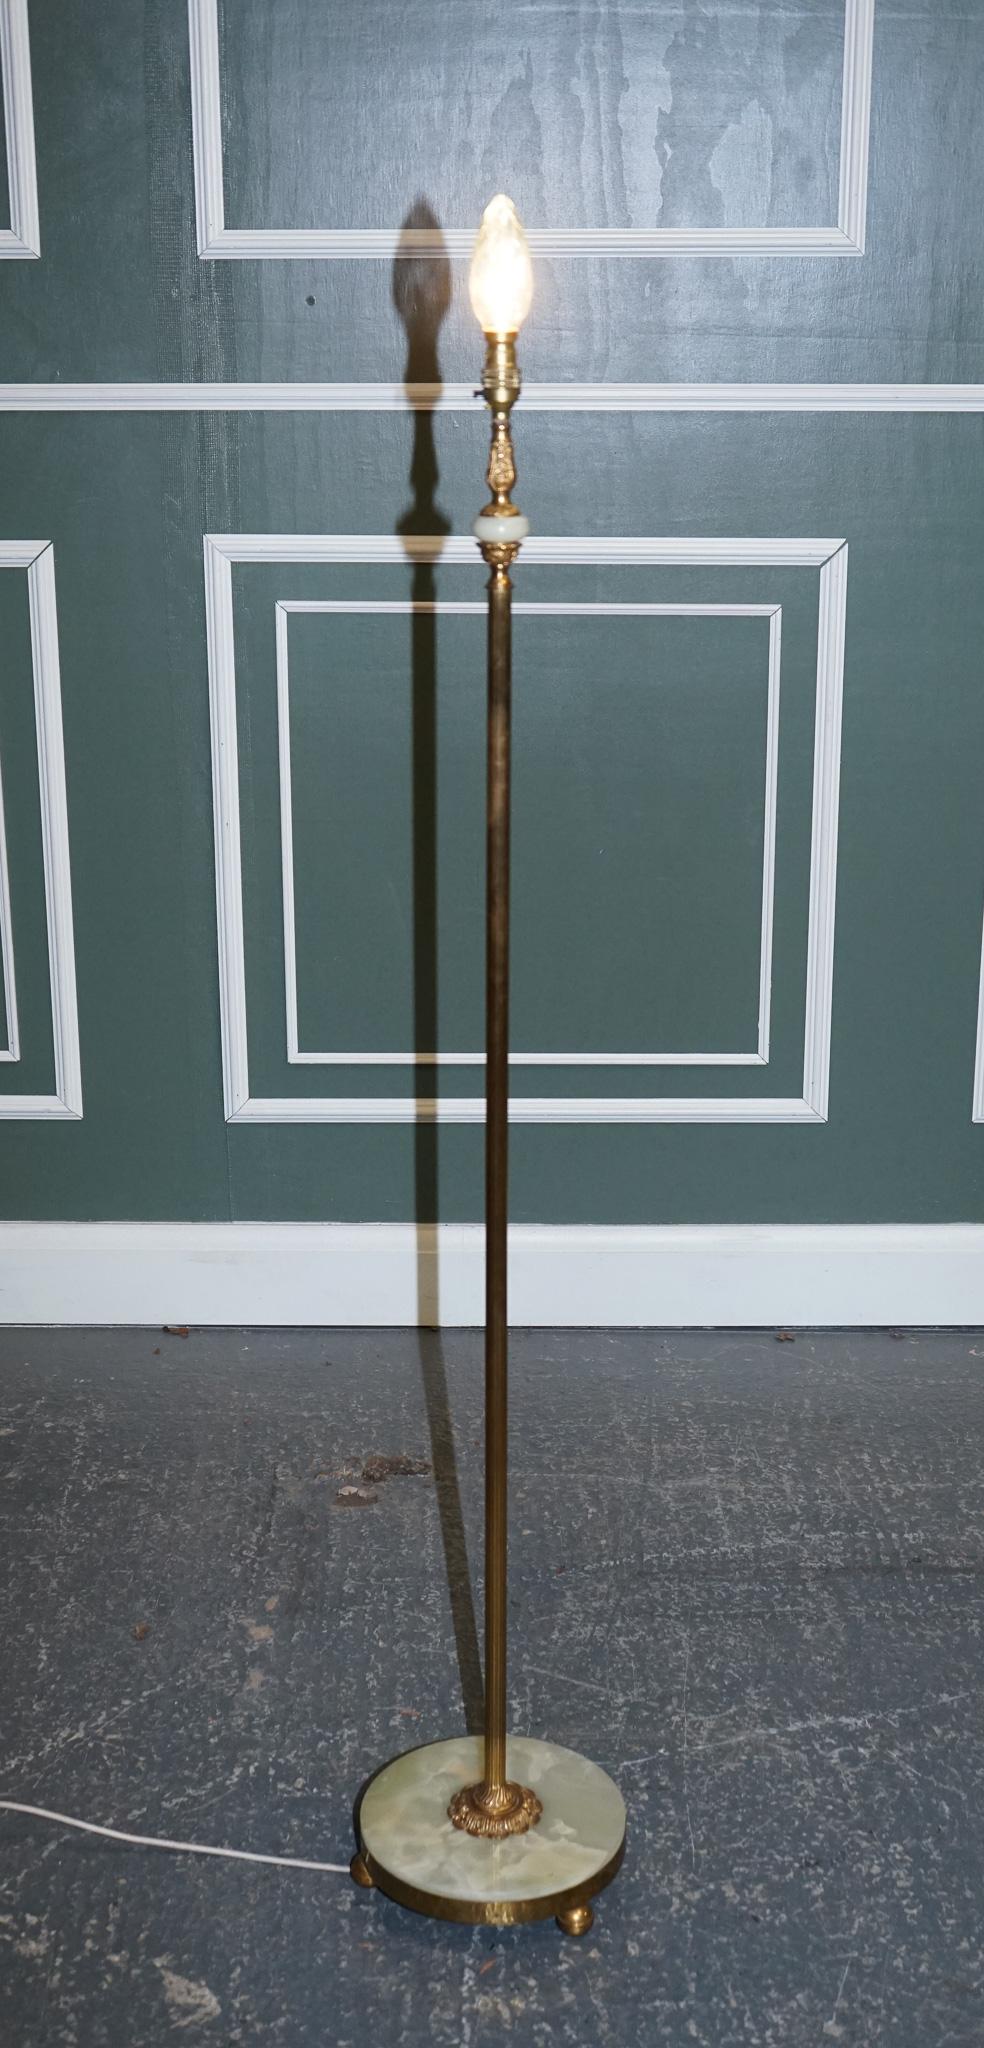 We are delighted to offer for sale this Lovely midcentury Brass & Onyx Floor Lamp.

We have lightly restored this by cleaning it all over and hand polishing.

Please carefully examine the pictures to see the condition before purchasing, as they